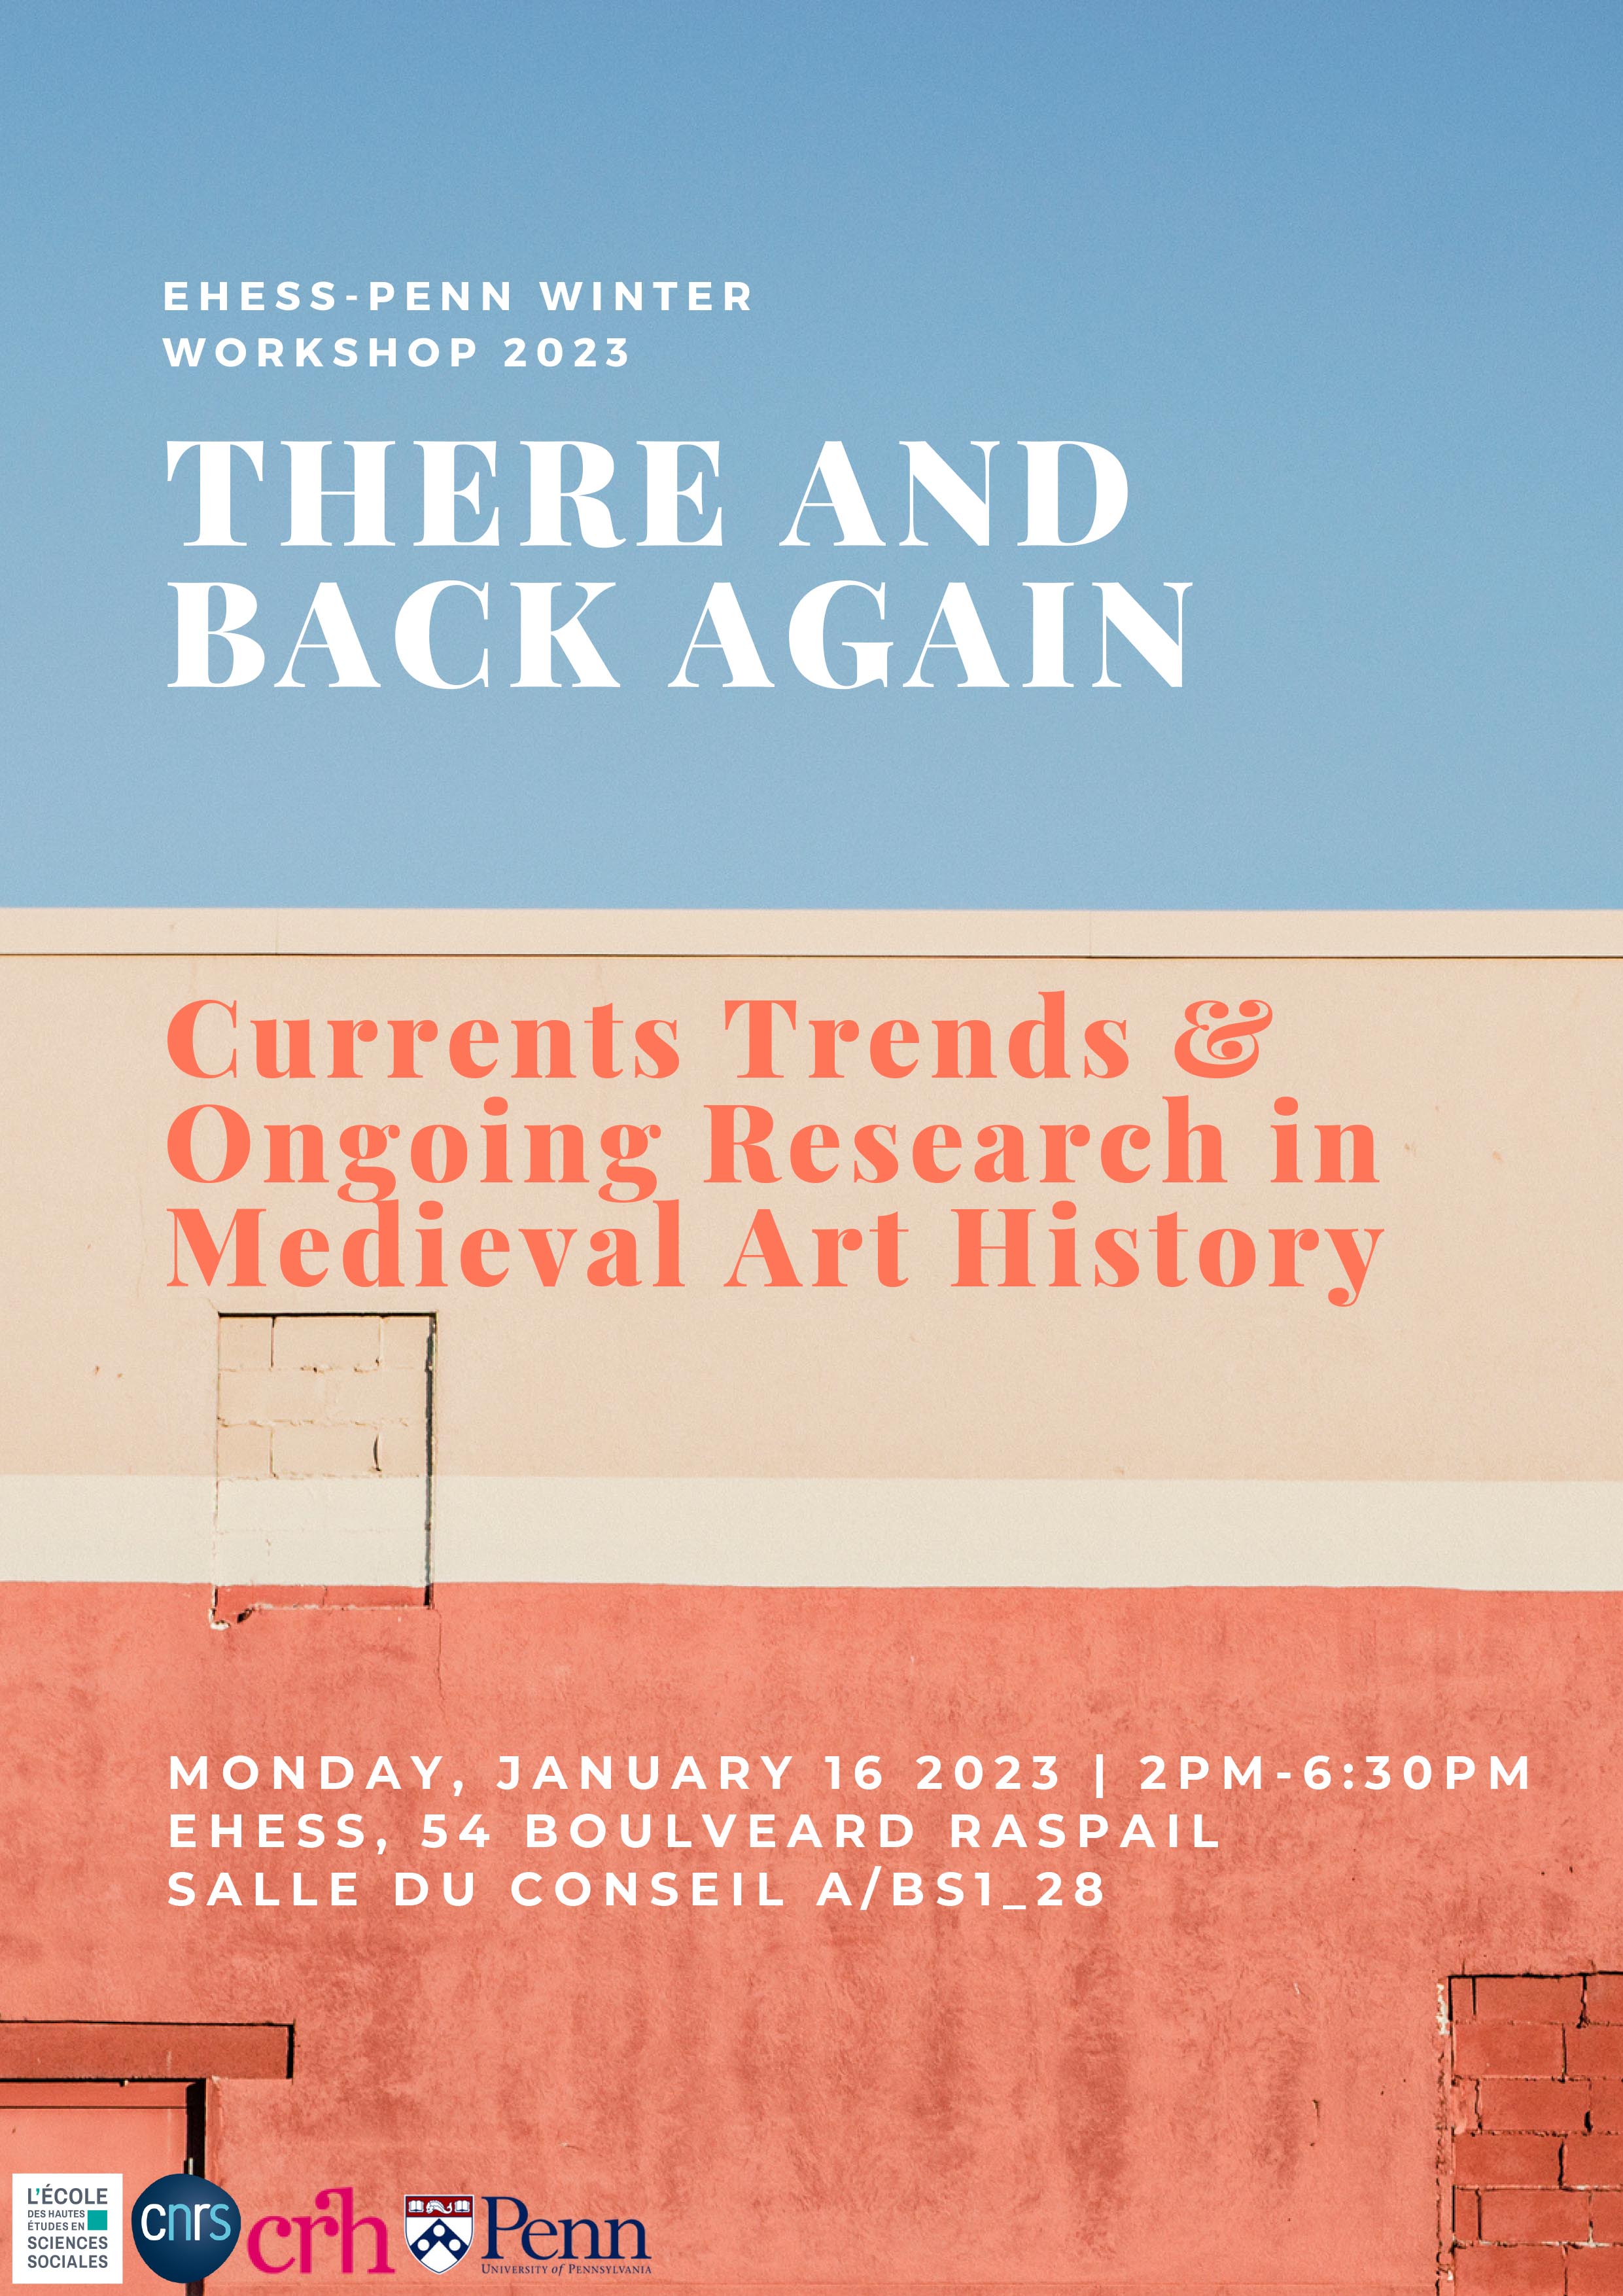 There and Back Again. Current Trends and Ongoing Research in Medieval Art History